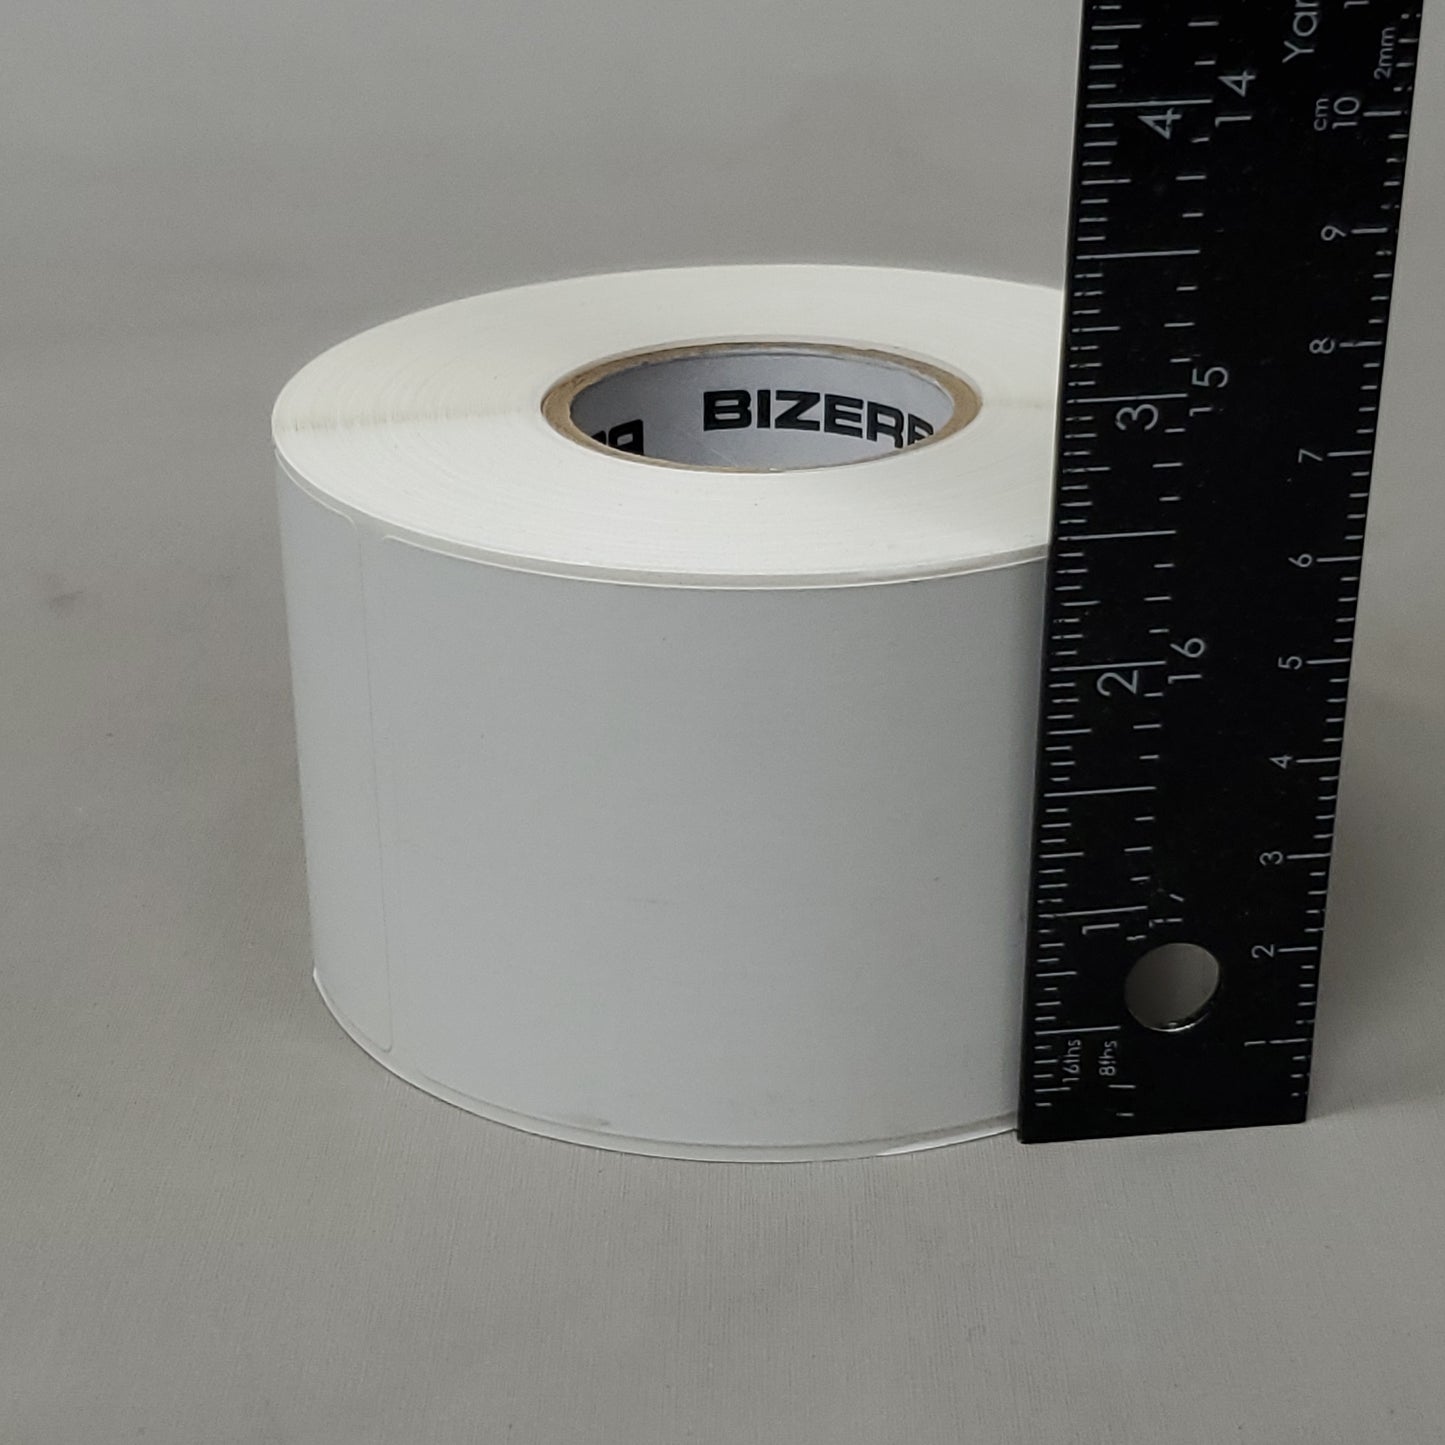 BIZERBA Case of 30 Rolls 480 Direct Thermal Labels Per Roll 58X93MM (03/22)